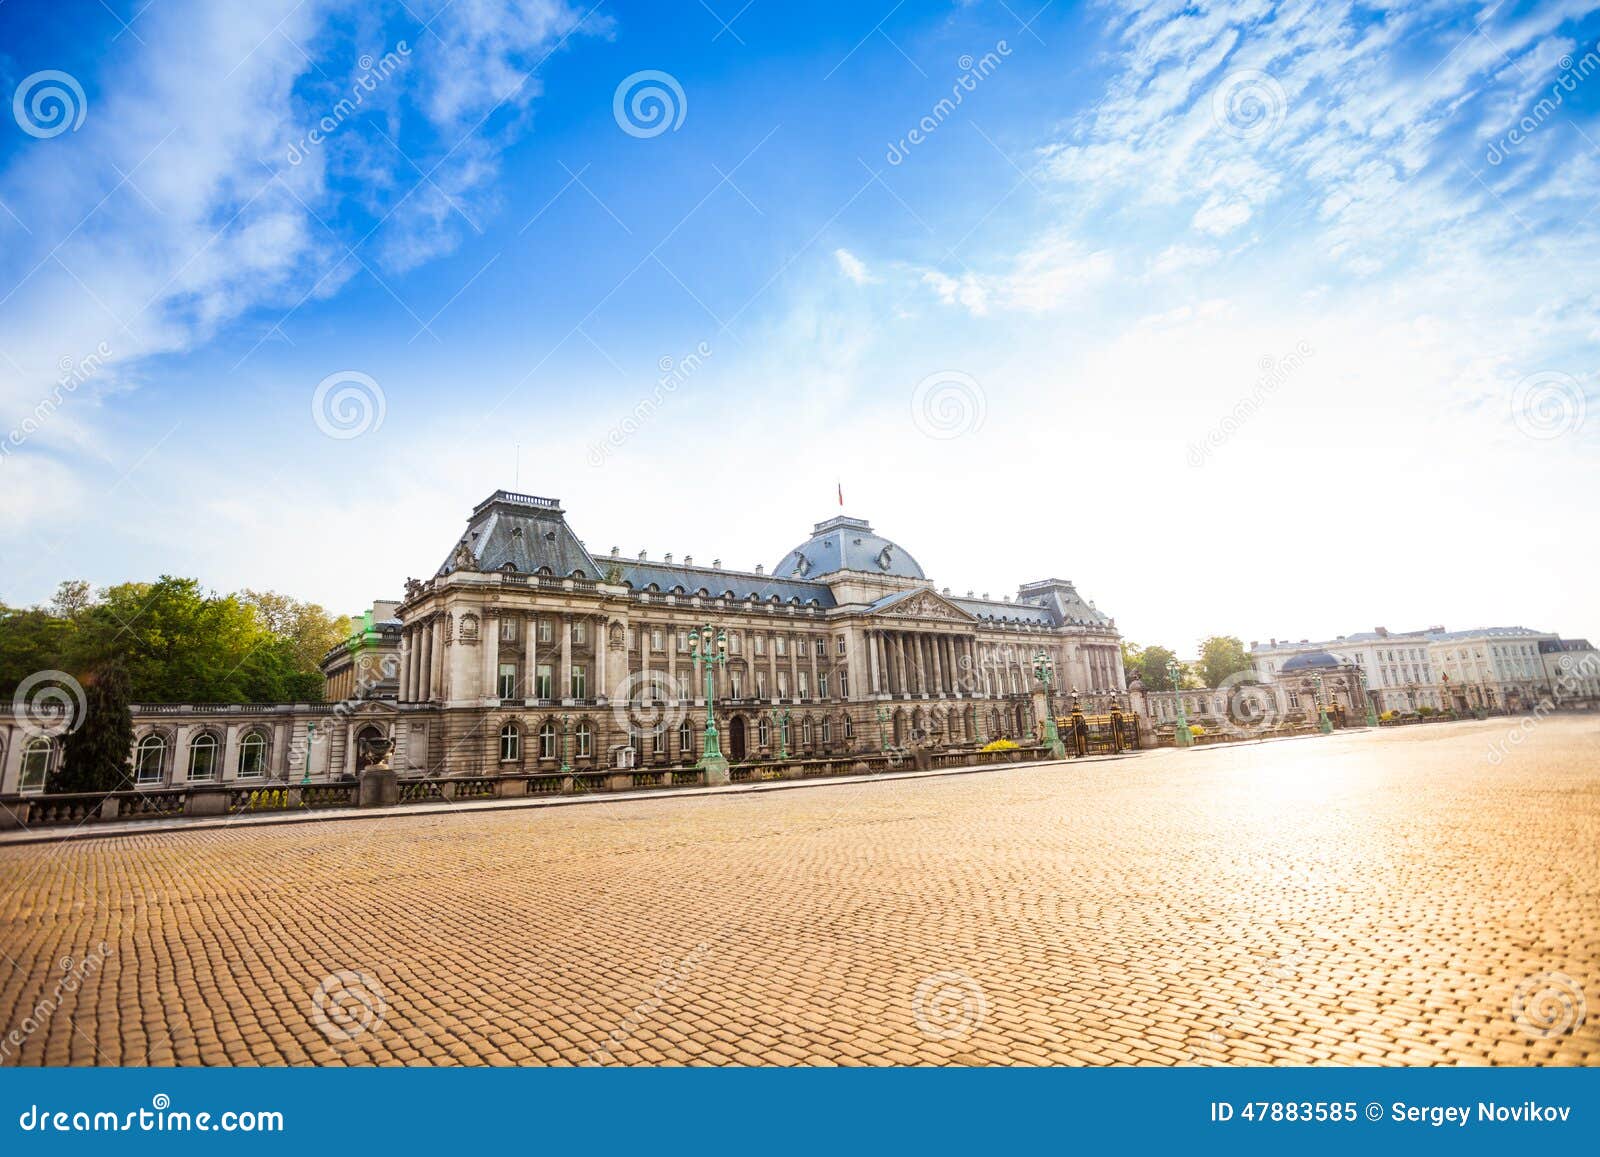 royal palace of brussels at daytime in belgium